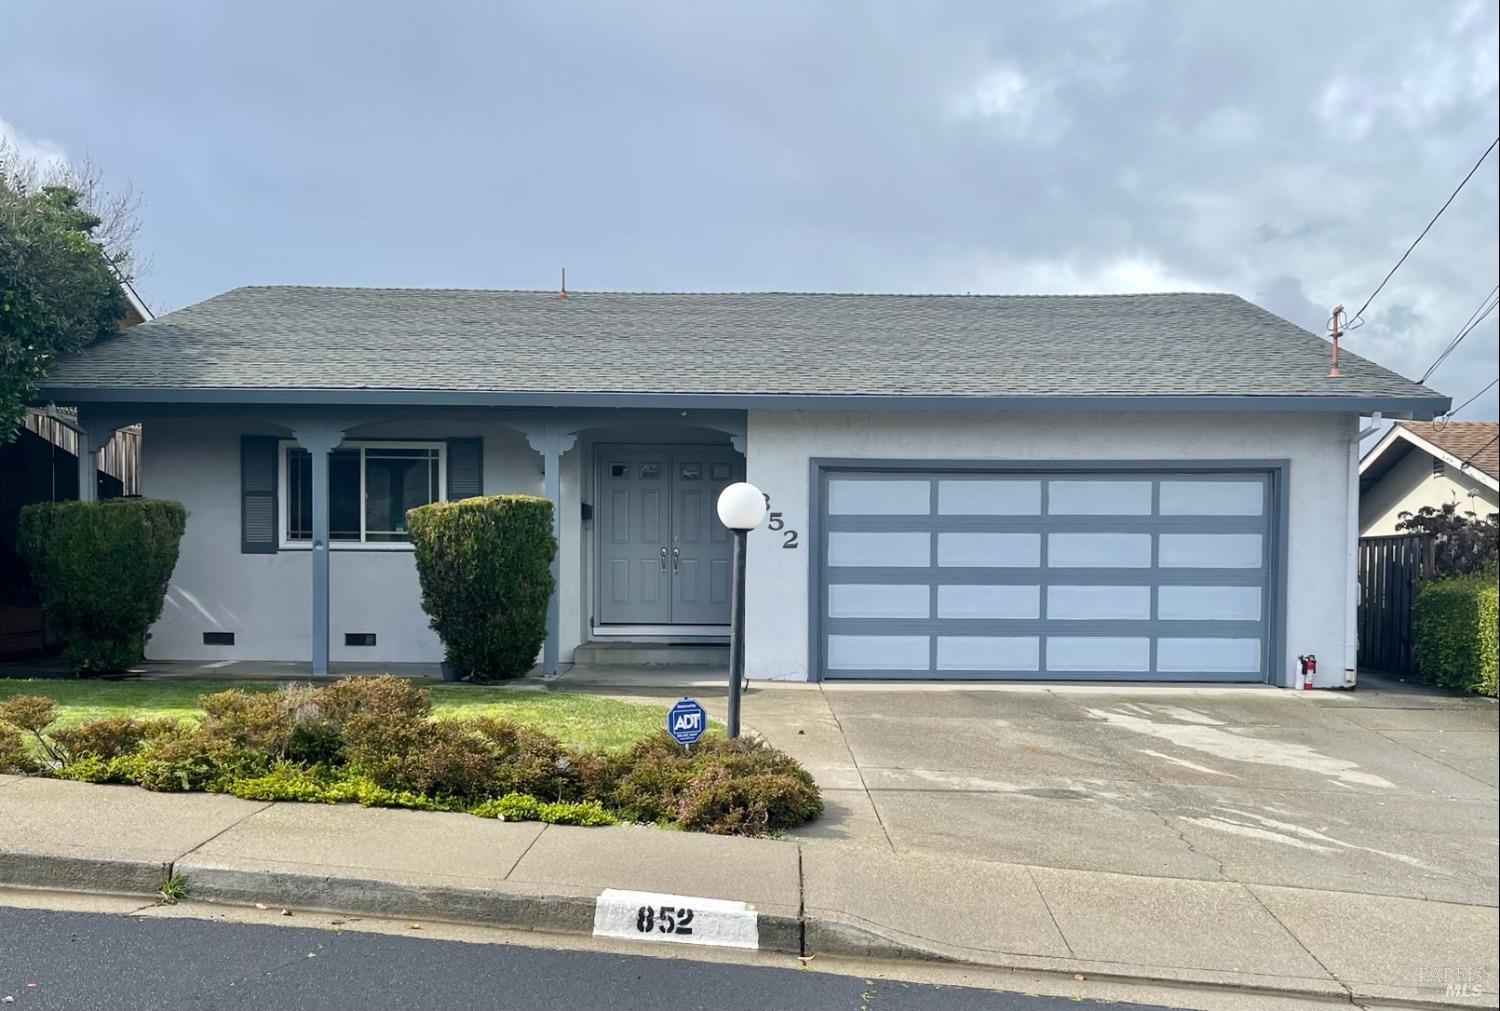 Photo of 852 Rogers Wy in Pinole, CA